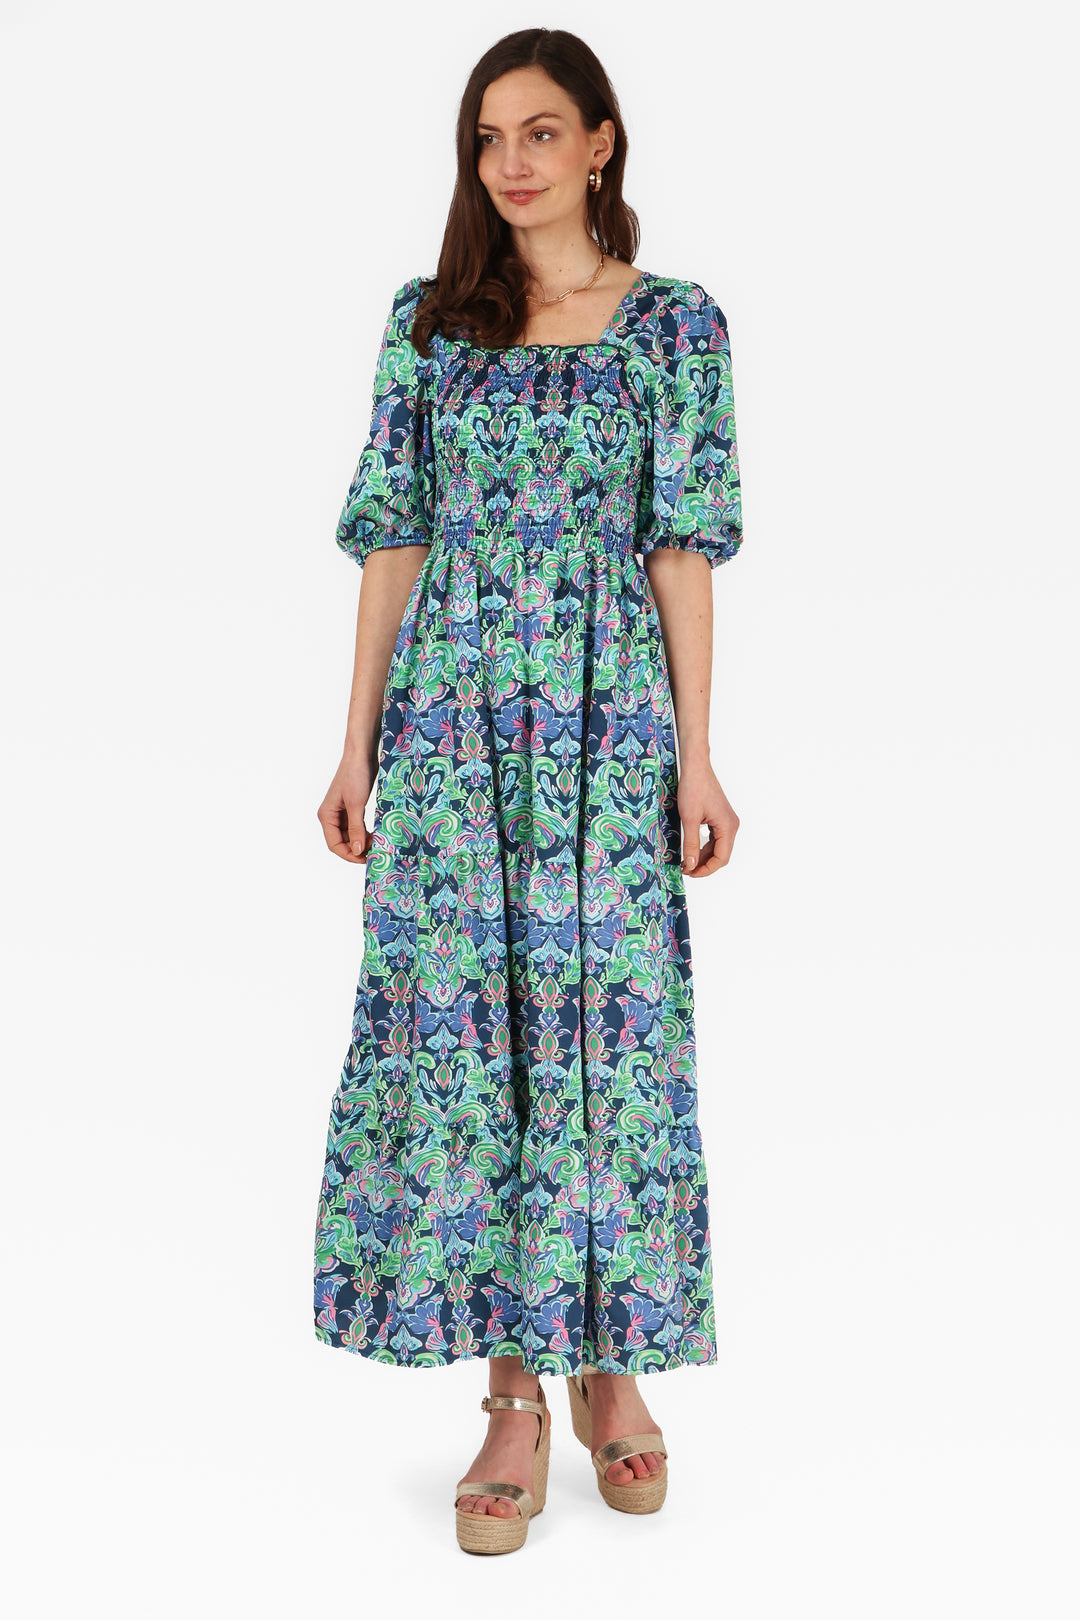 model wearing a blue tiered milkmaid maxi dress with short sleeves and an all over fleur de lis floral print 1